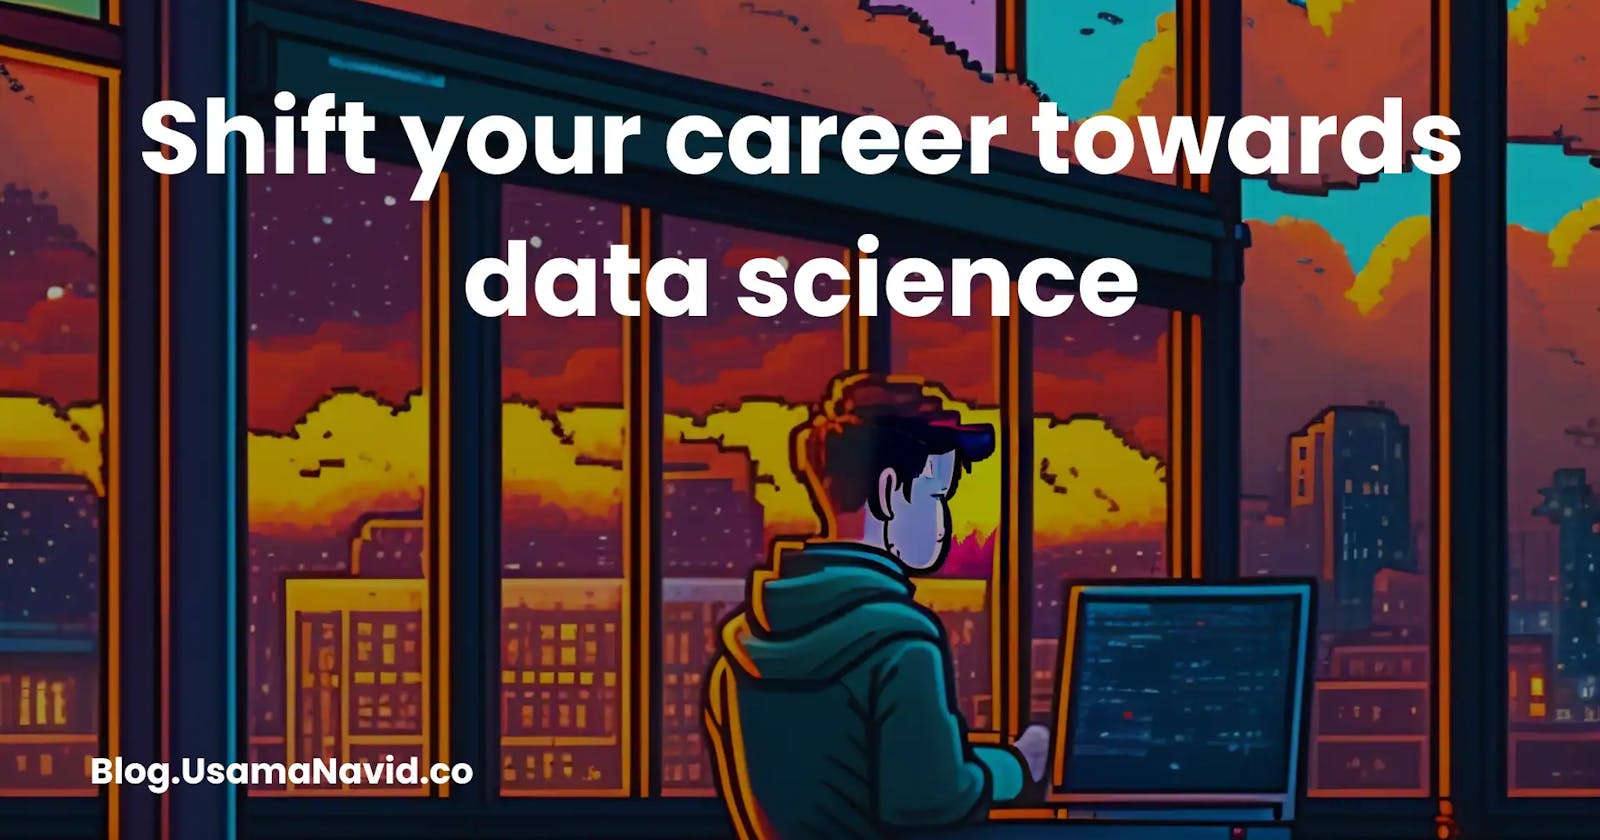 Shift your career towards data science